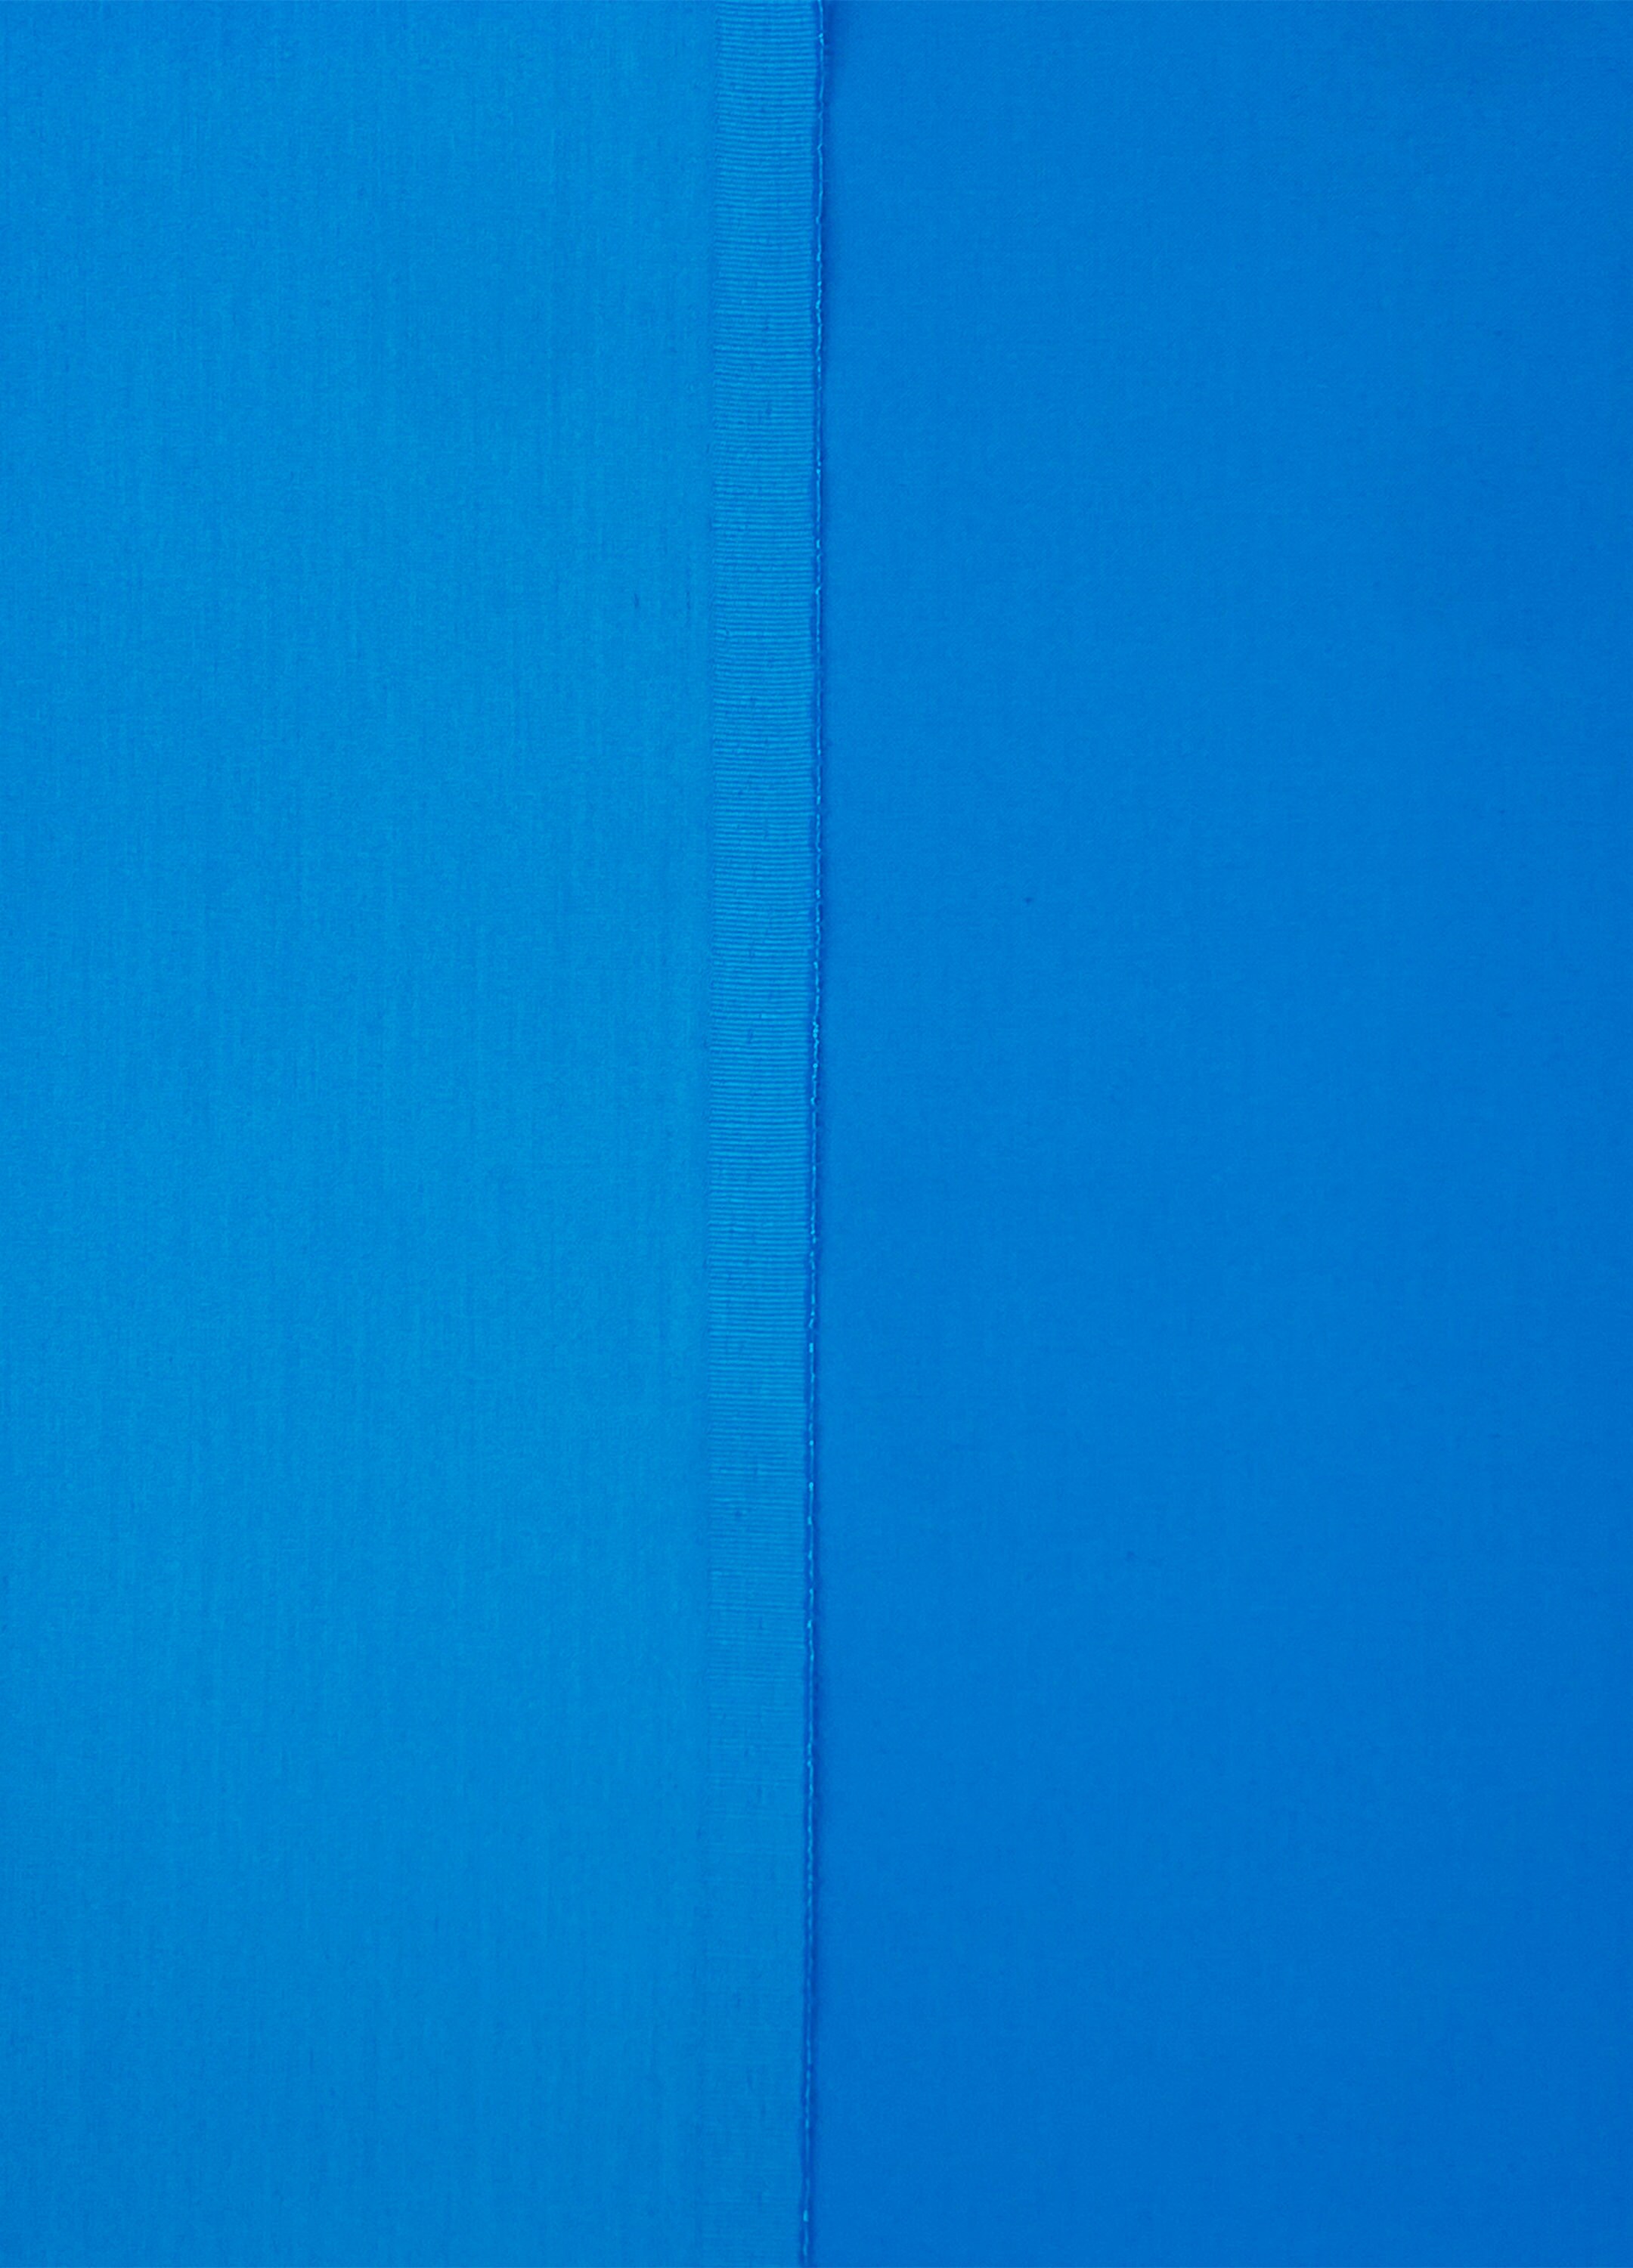 Cerulean Blue Cotton Sateen Fabric, Premium Cotton Shirting Fabric for  Sewing Apparel Home Decor, Deadstock Fabric 